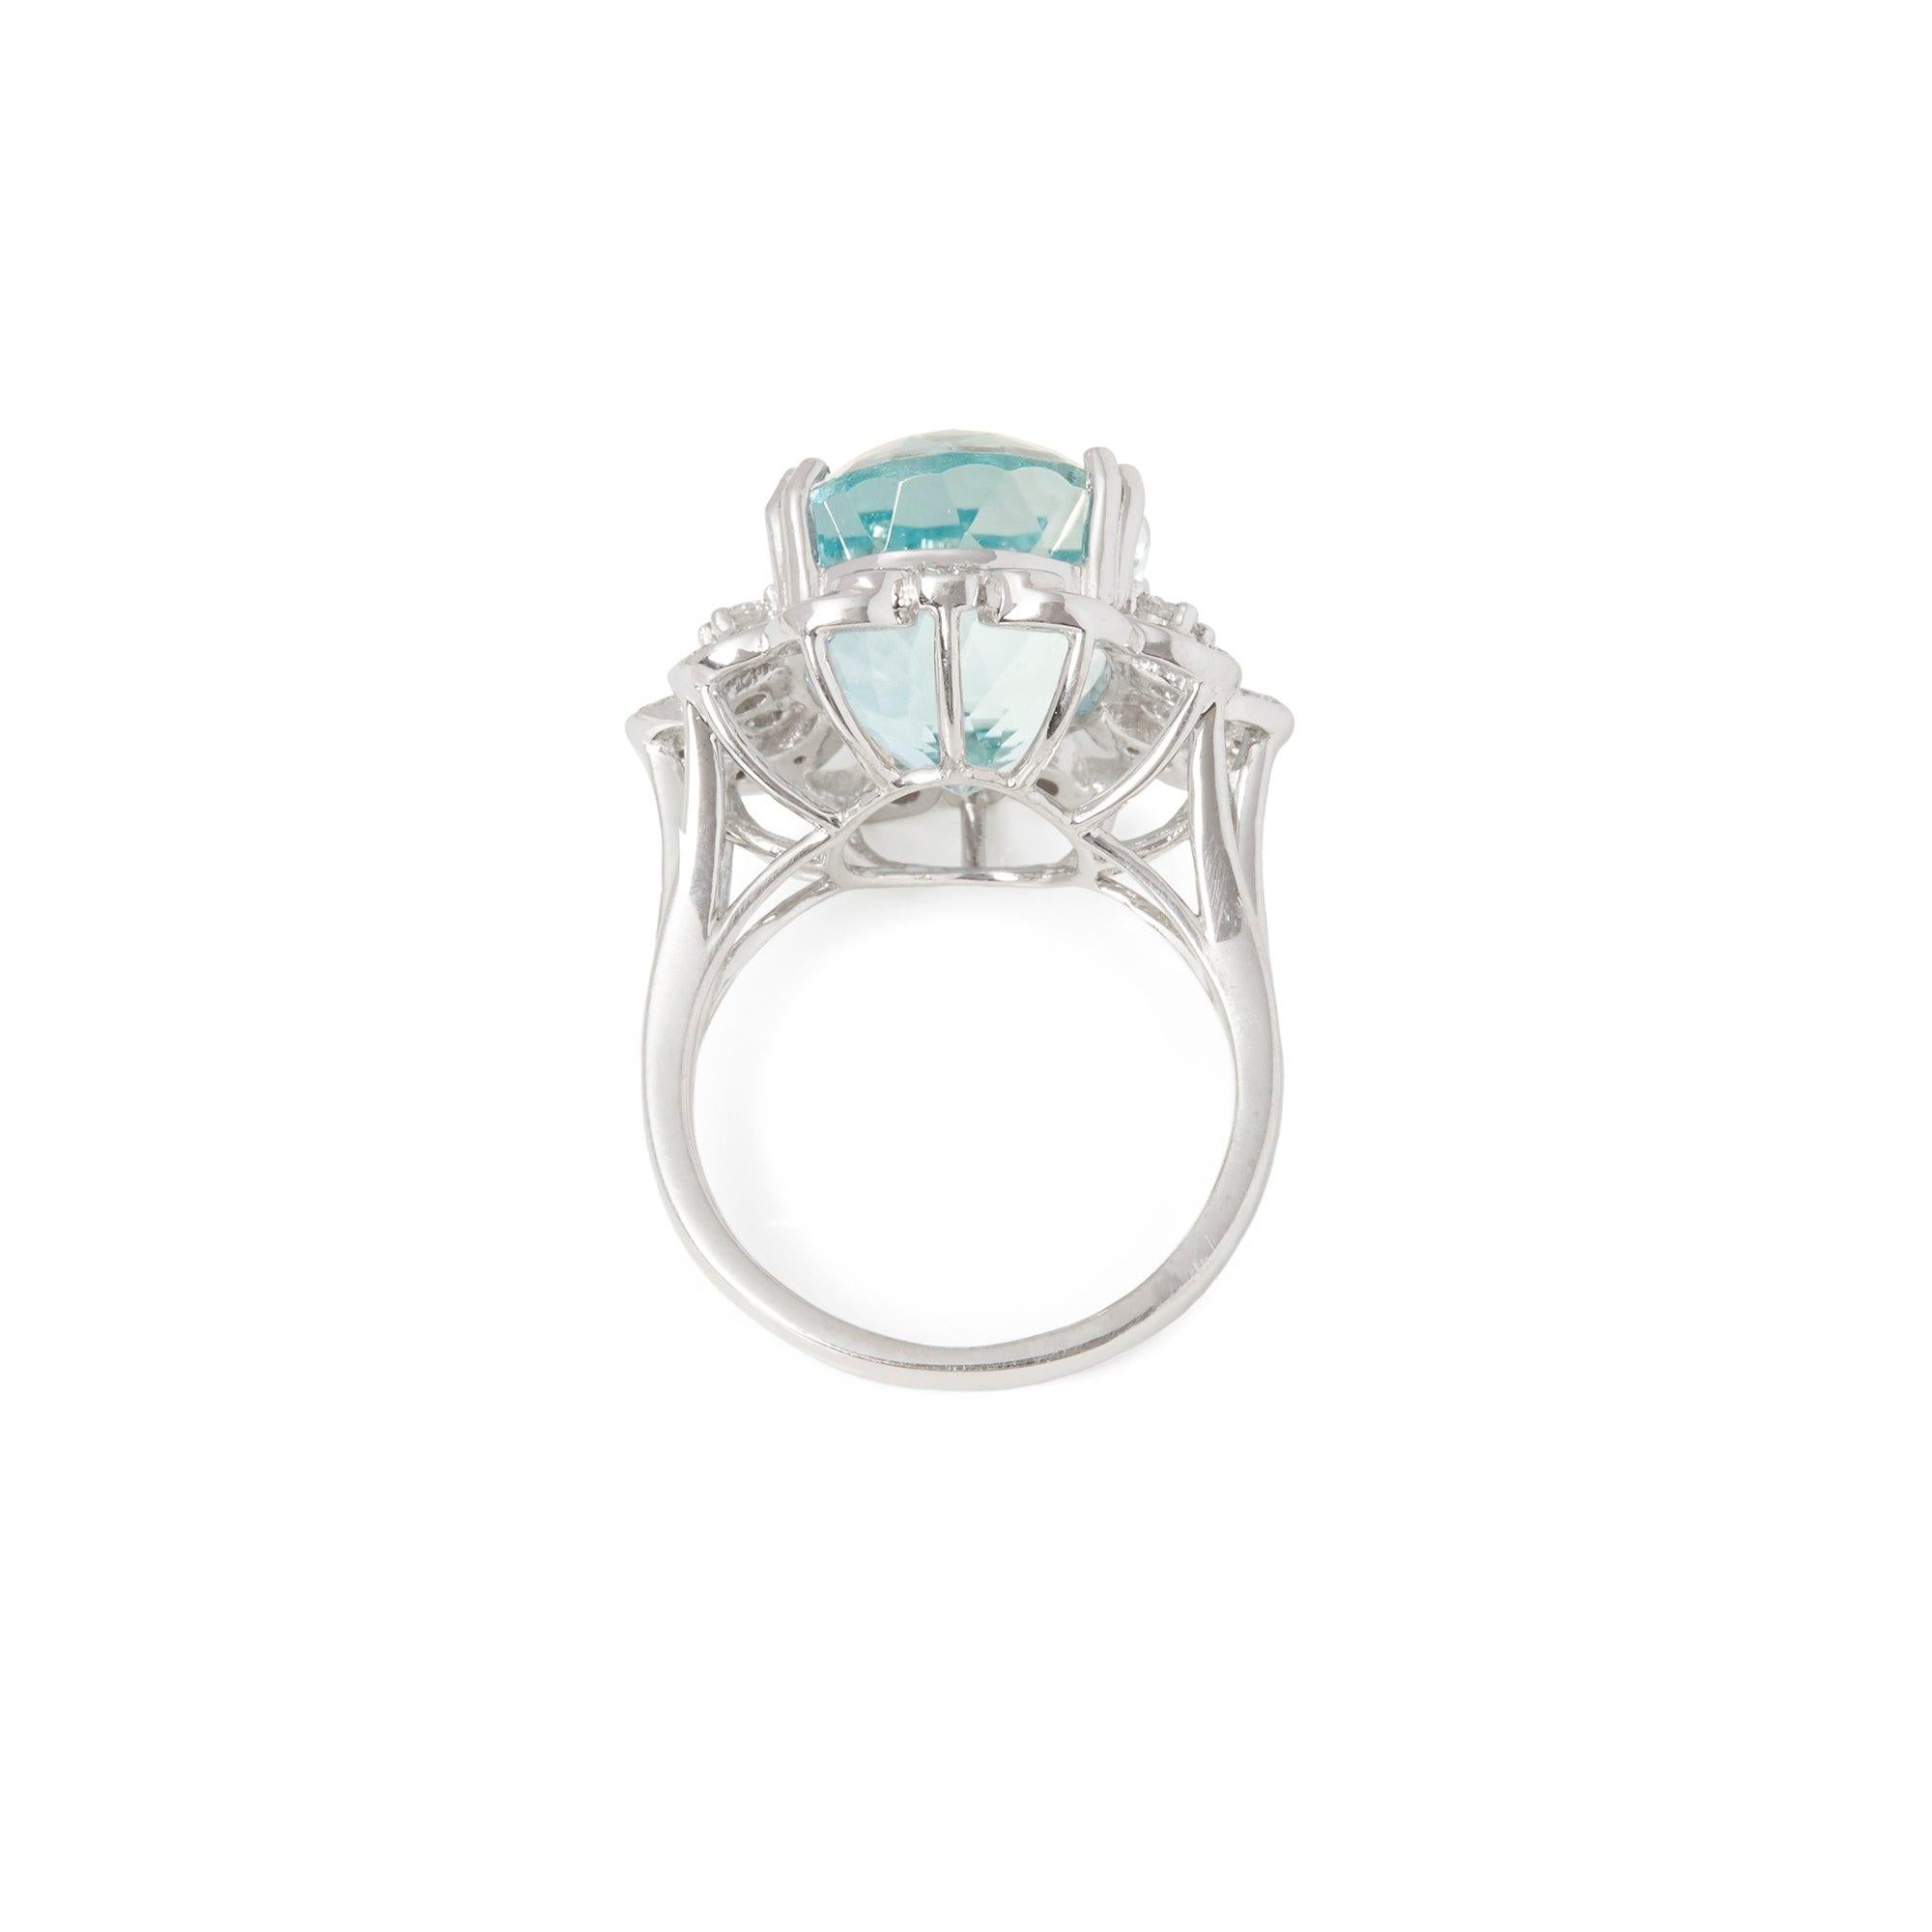 Certified 12.93ct Unheated Brazilian Aquamarine and Diamond Platinum Ring In New Condition For Sale In Bishop's Stortford, Hertfordshire